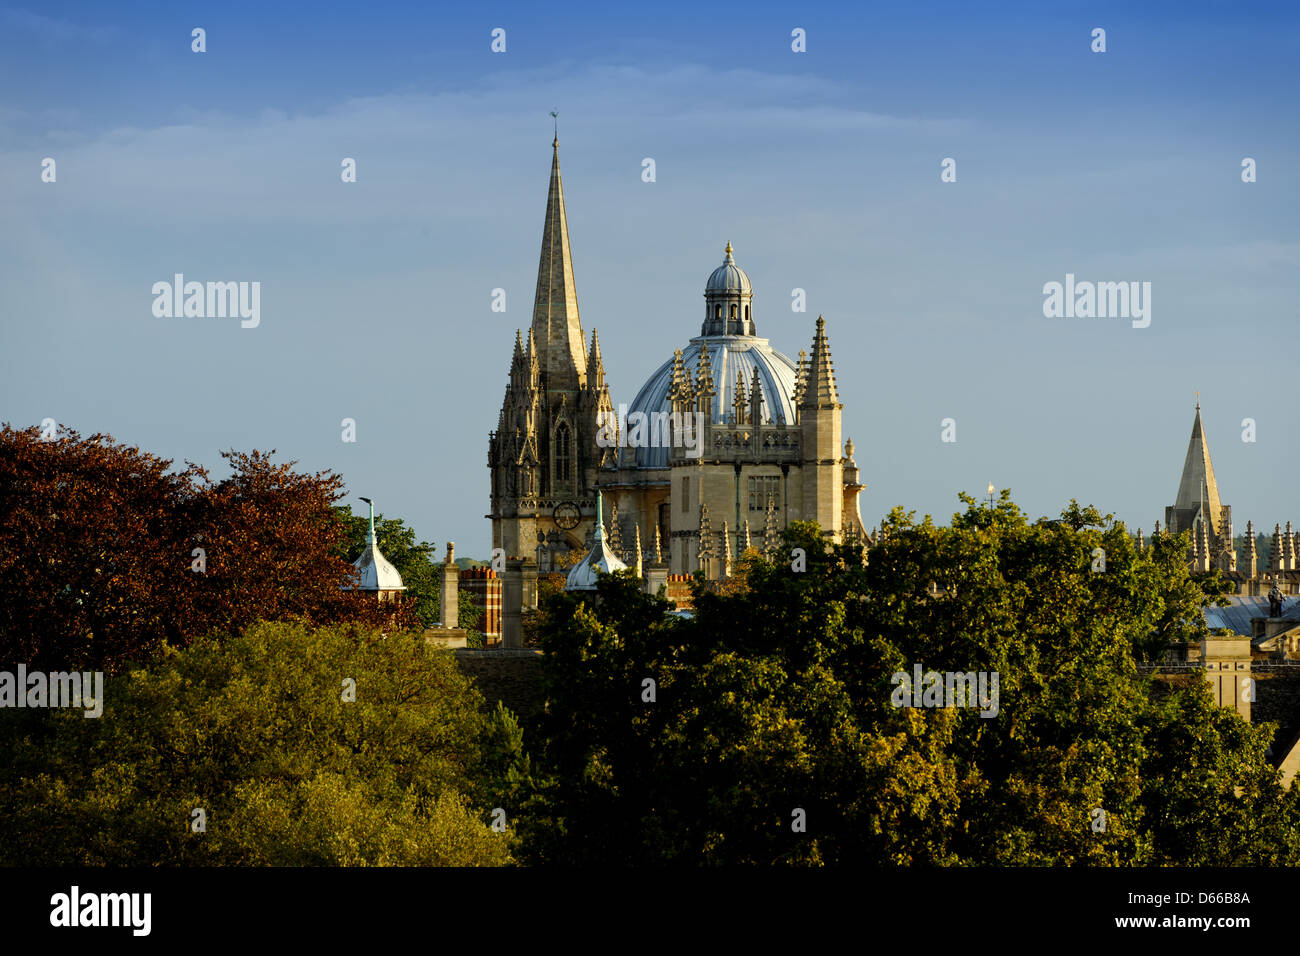 View of Oxford from the Earth Sciences building looking towards the Radcliffe Camera, St Mary's Church and the Old Schools Tower Stock Photo